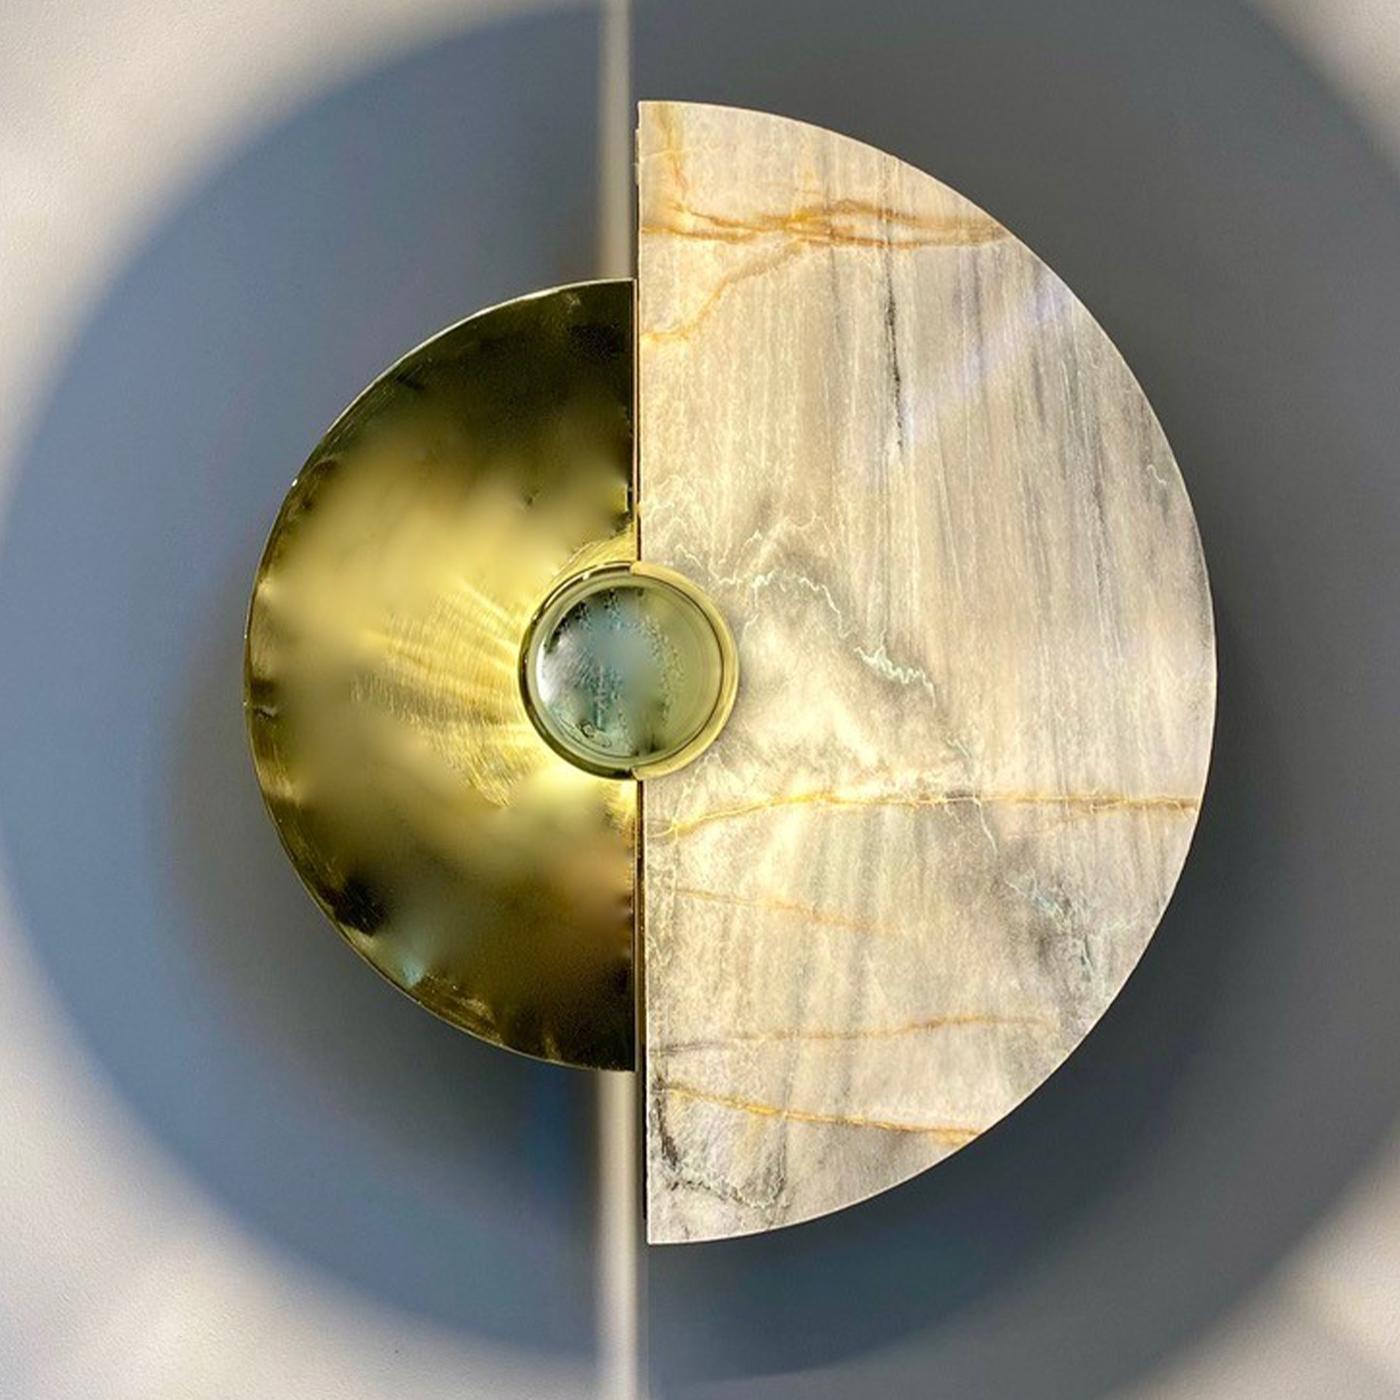 Levante Wall Sconce in polished brass and Brita blue onyx, composed of half disks that can be moved on the central body. Play with the various positions (30 degrees, each) of the disks to create magic shade and light effects on the wall. Please,